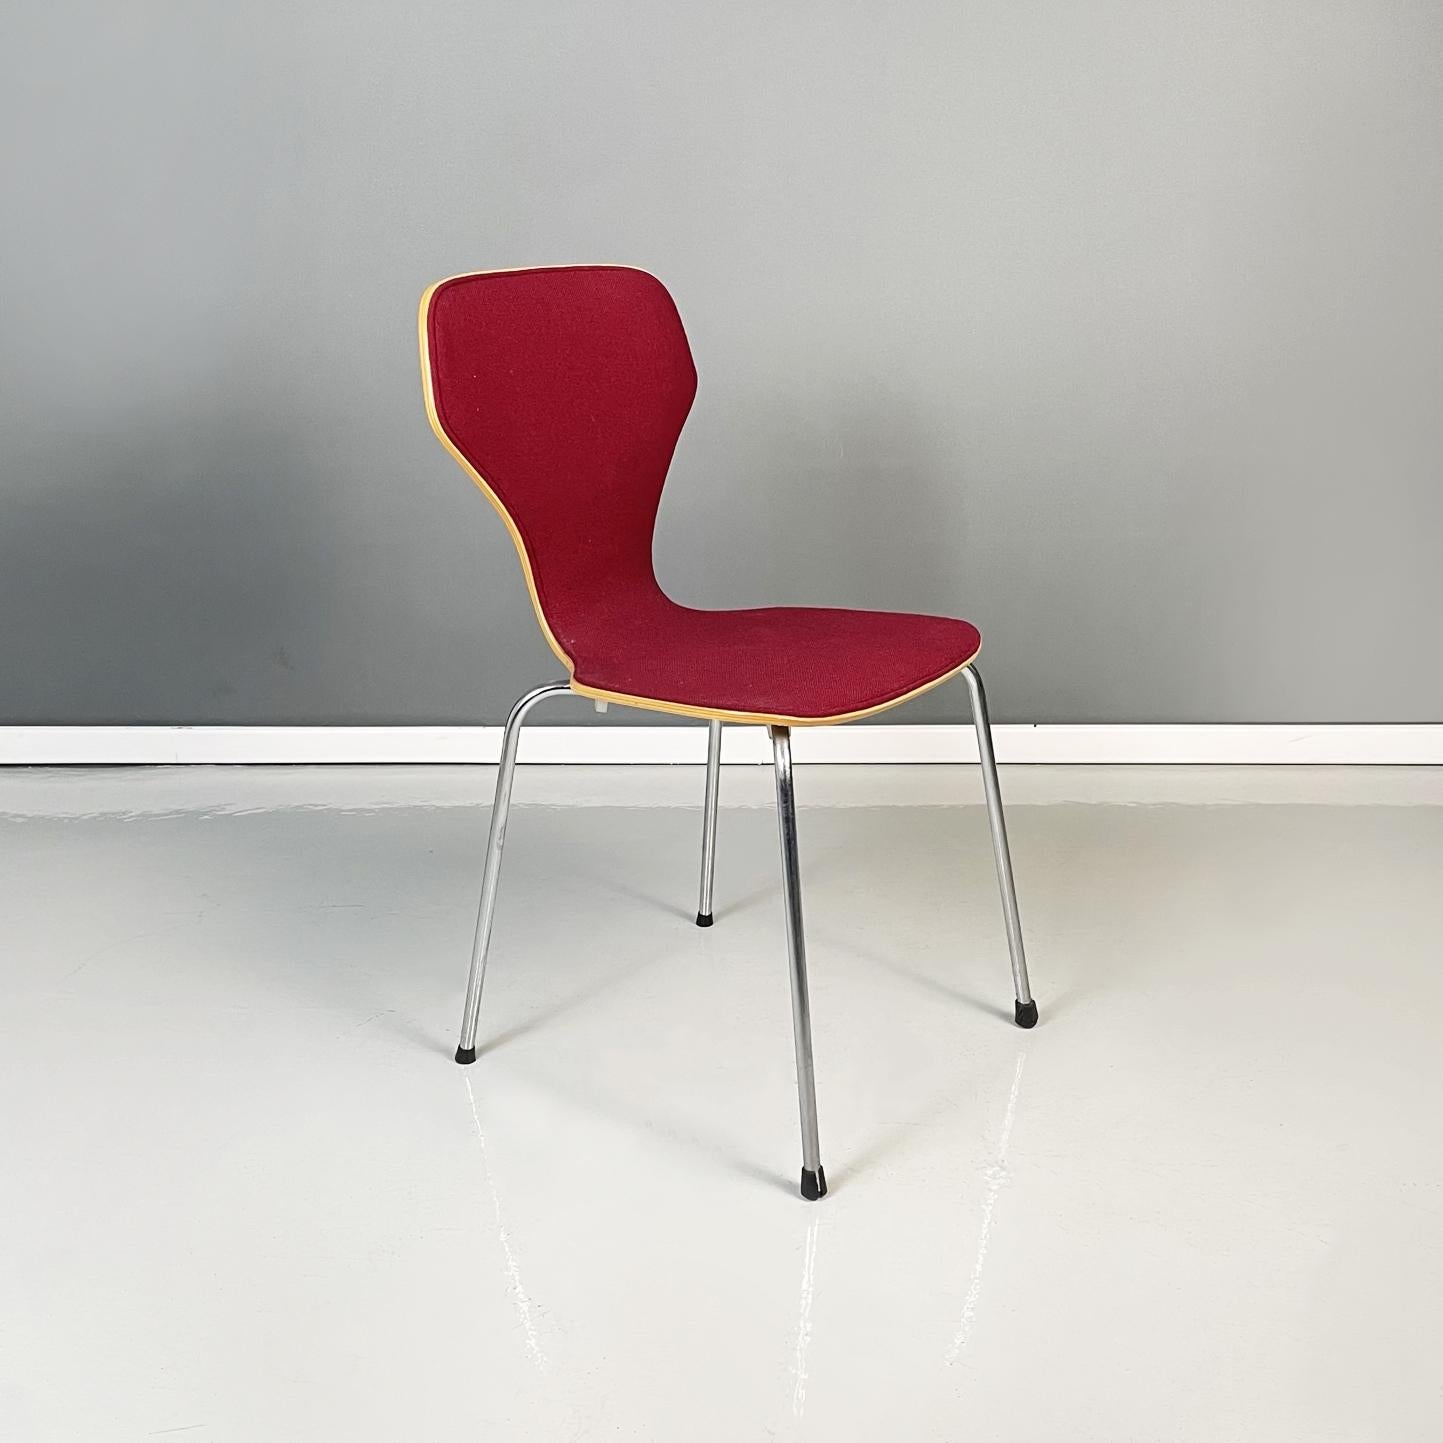 Danish Modern wooden, bordeaux fabric and steel chair by Phoenix, 1970s.
Danish dining chair in bent wood, with seat and back upholstered in bordeaux red fabric. The legs are in steel with black rubber feet. Stackable.
It is produced by Phoenix in